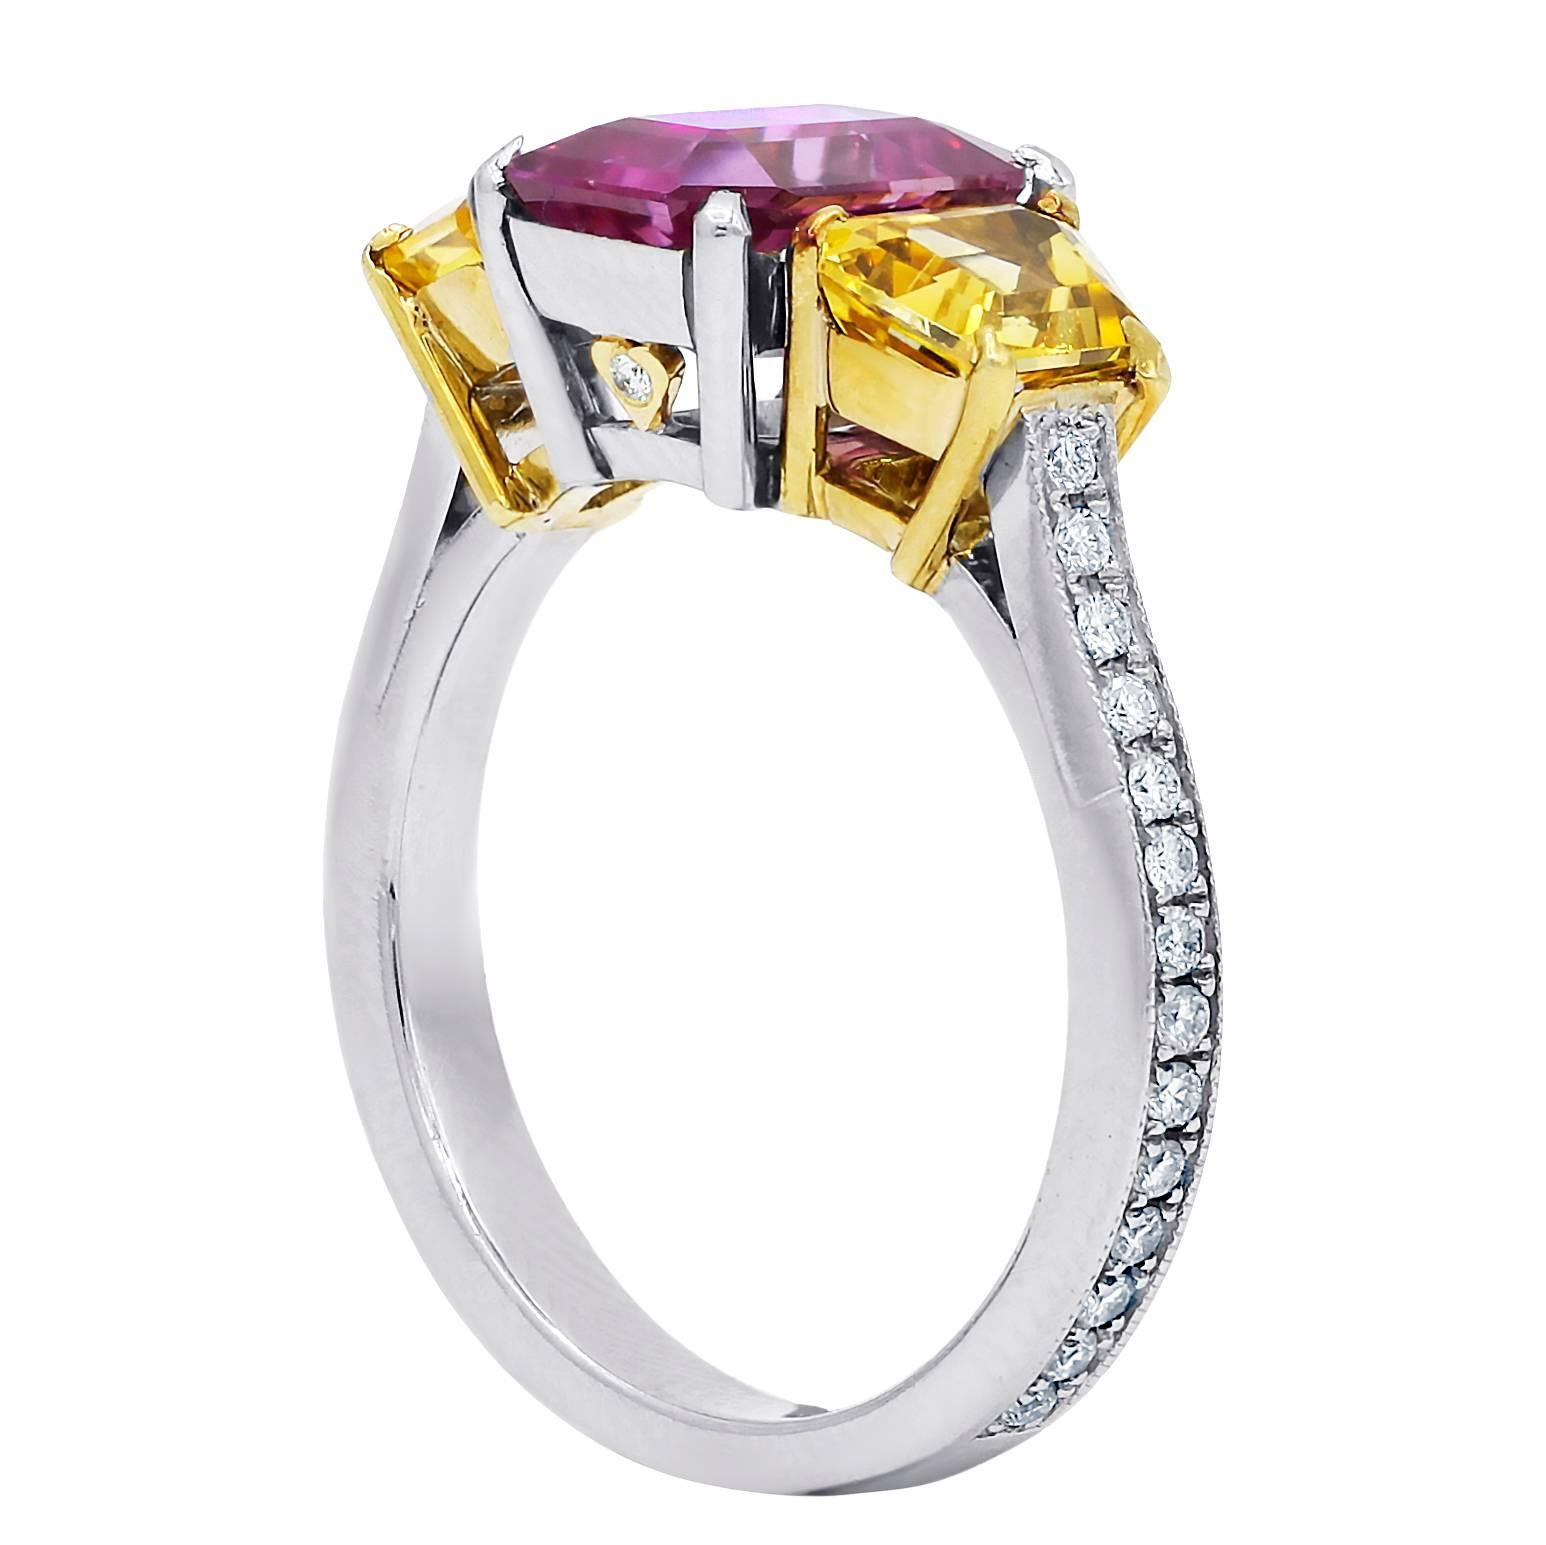 Platinum and 18 karat yellow gold three stone ring containing emerald cut pink sapphire in the center,weighing 2.45 carats set with 1.79 cts trapezoid yellow sapphires on each side and accented by 0.80 cts round cut diamonds .